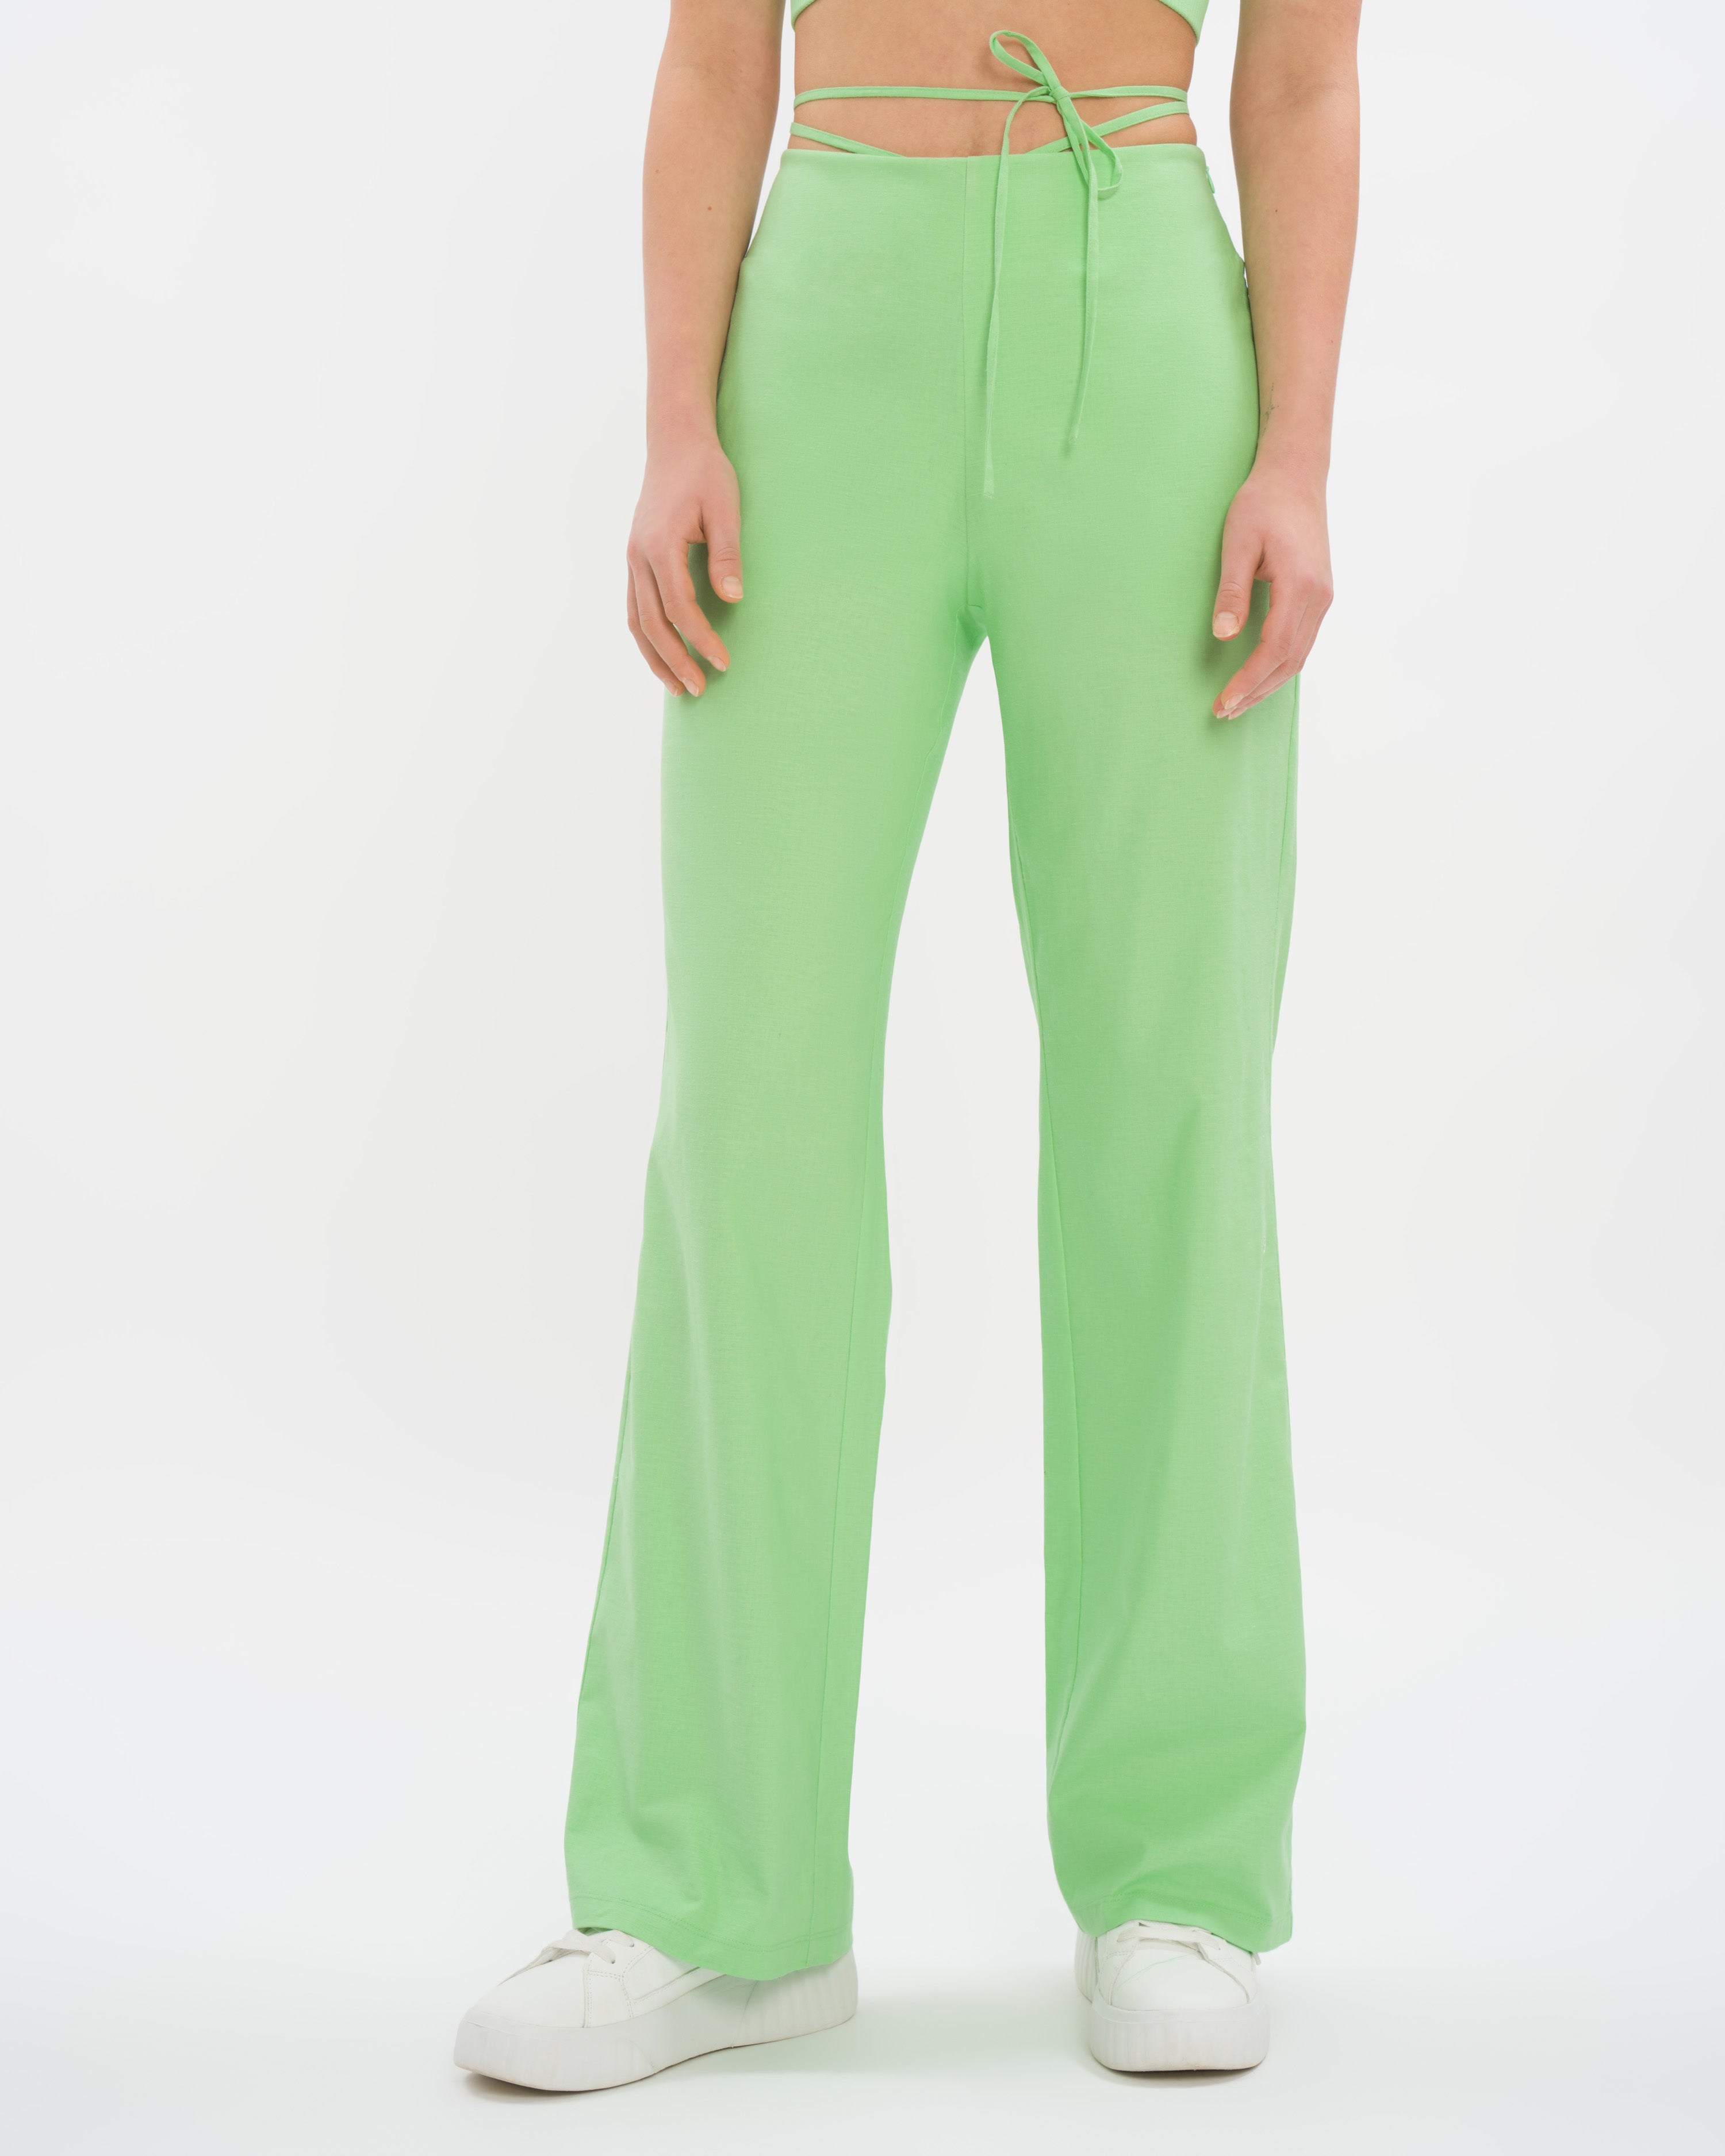 Lily Set Deluxe - Cider Green